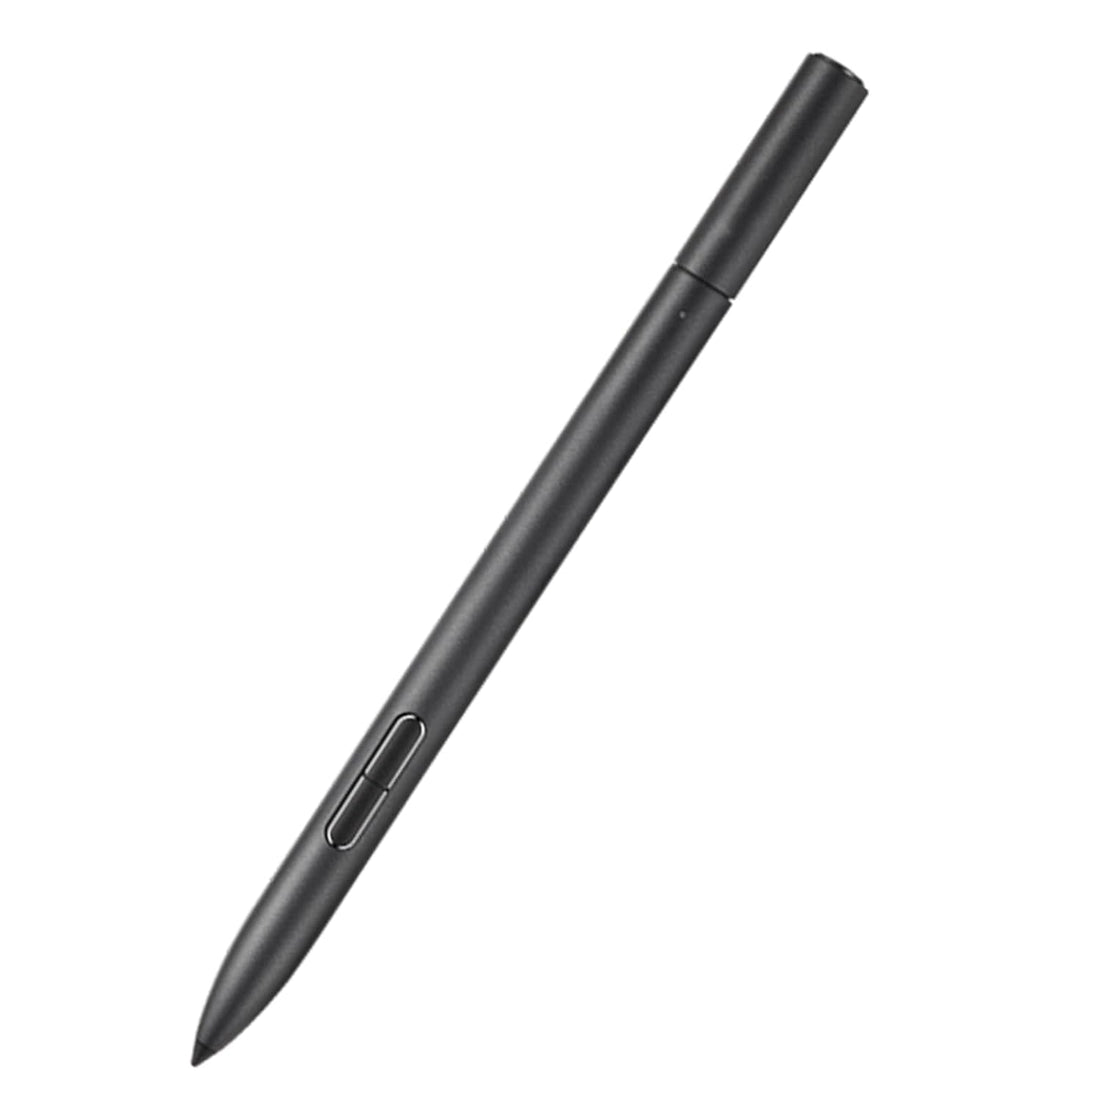 Stylus Digital Pen 2.0 for Asus SA203H Stylus Compatible with Asus ZenBook and VivoBook Slate, Black, Pen Only